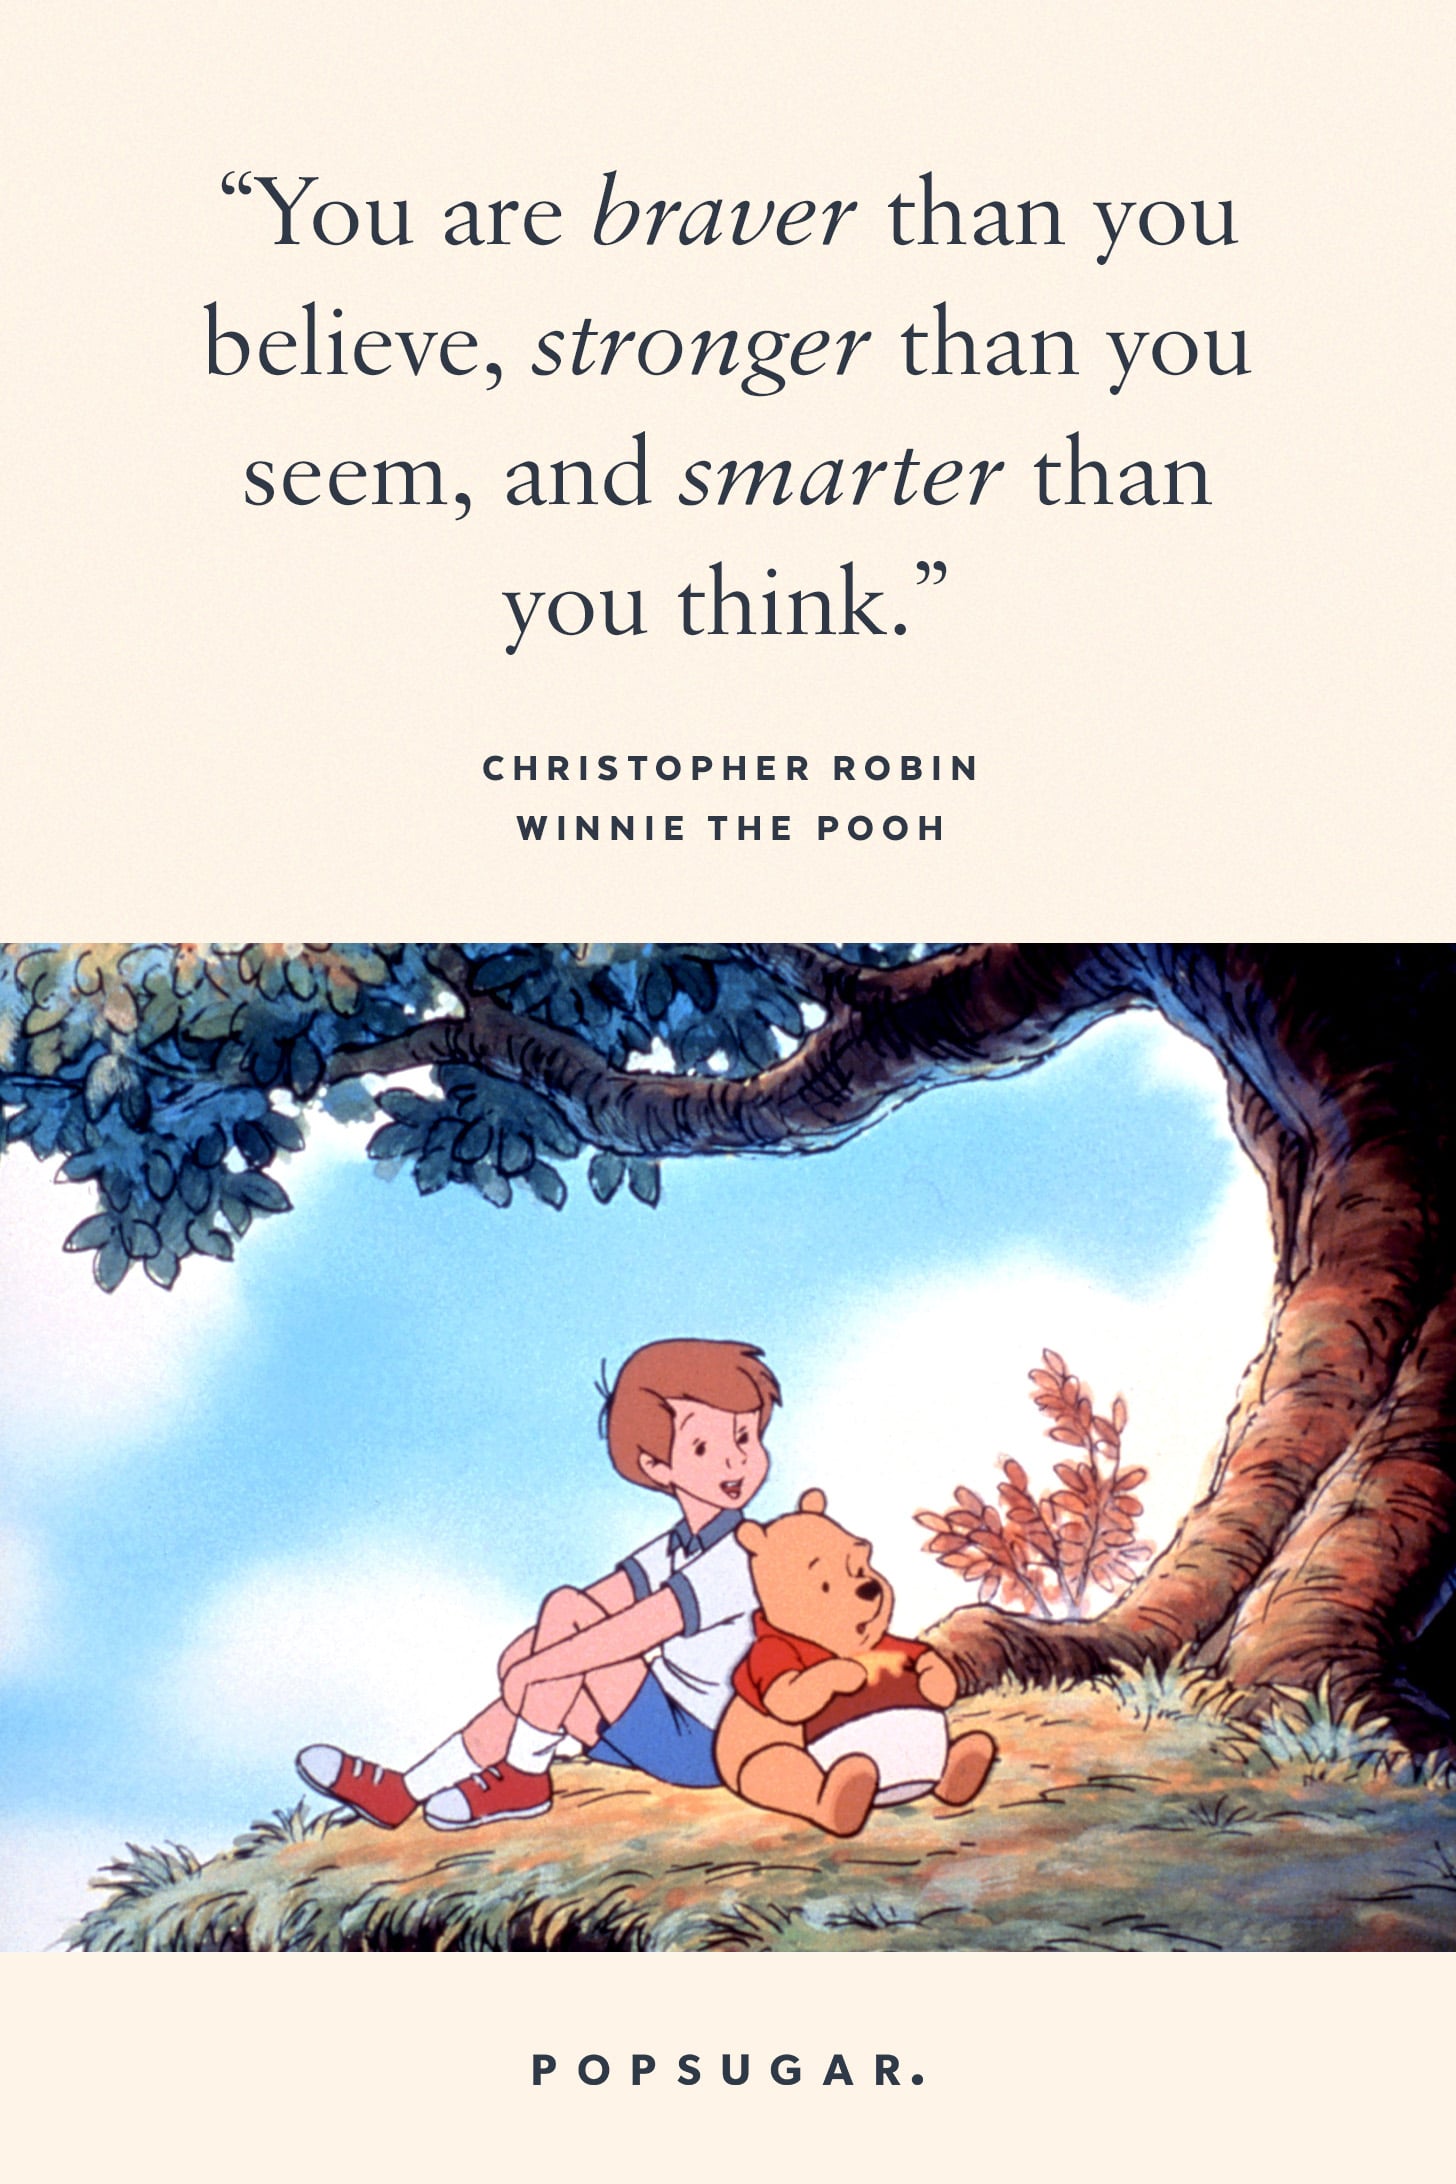 You Are Braver Than You Believe Stronger Than You Seem And Smarter 44 Emotional And Beautiful Disney Quotes That Are Guaranteed To Make You Cry Popsugar Smart Living Photo 45